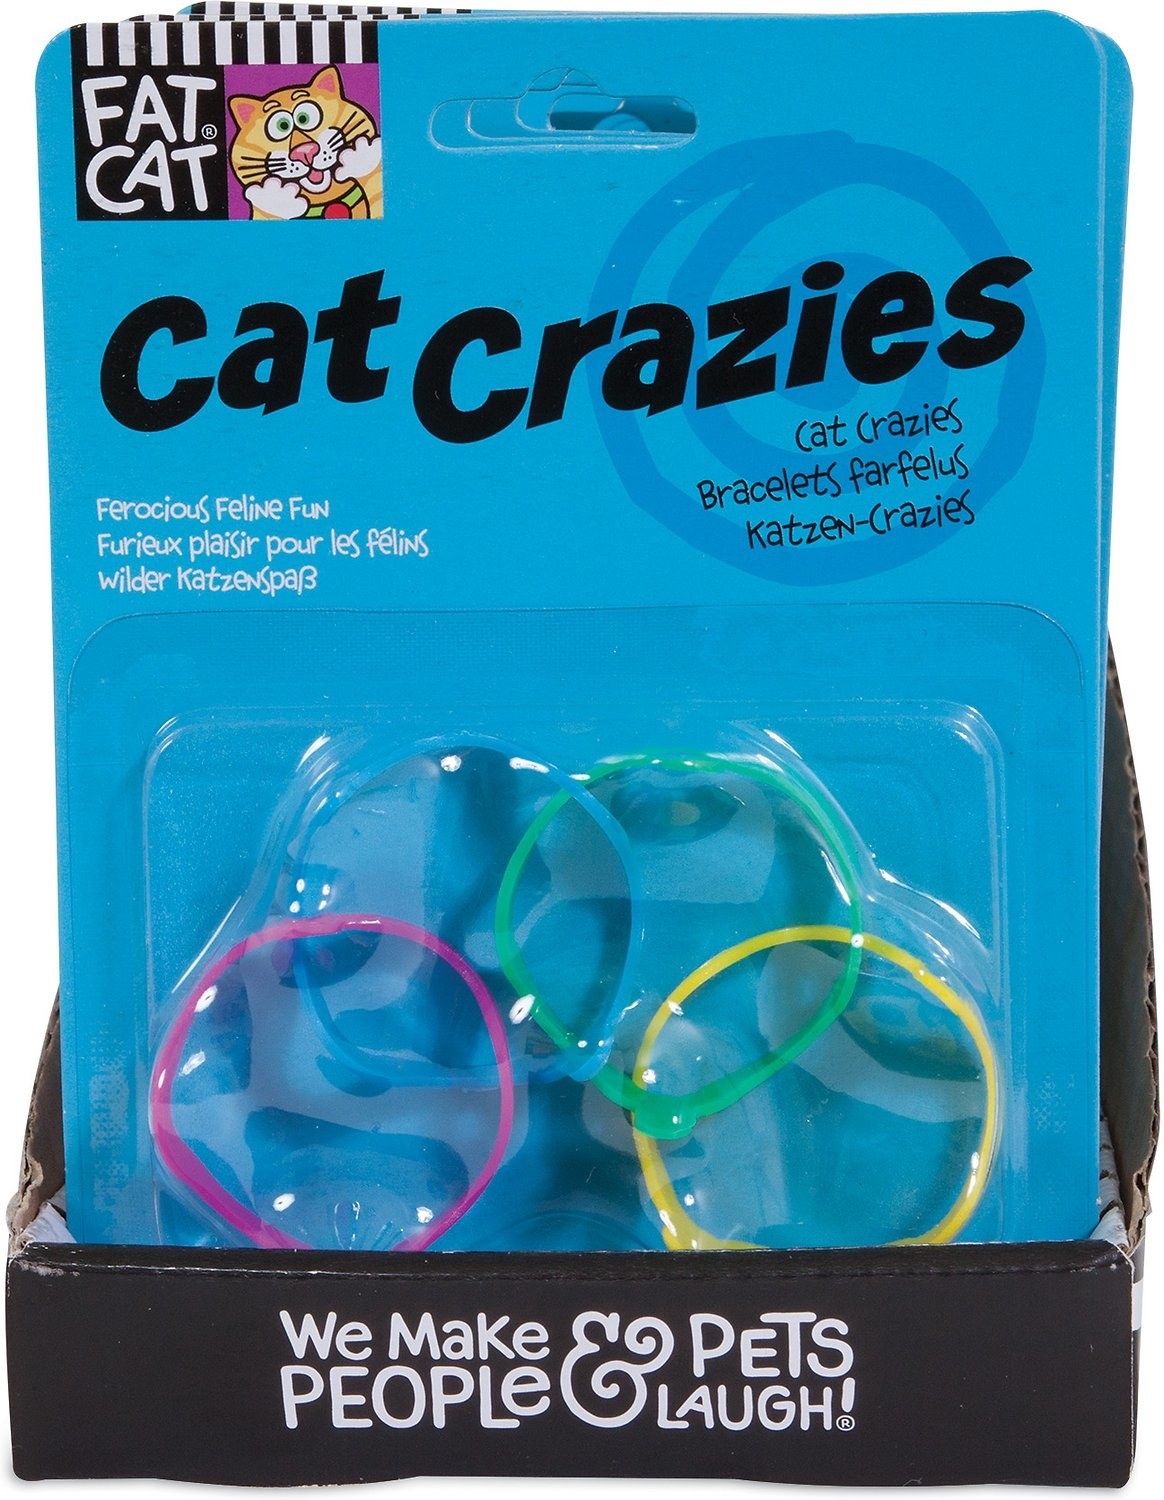 An image of a playrings cat toy